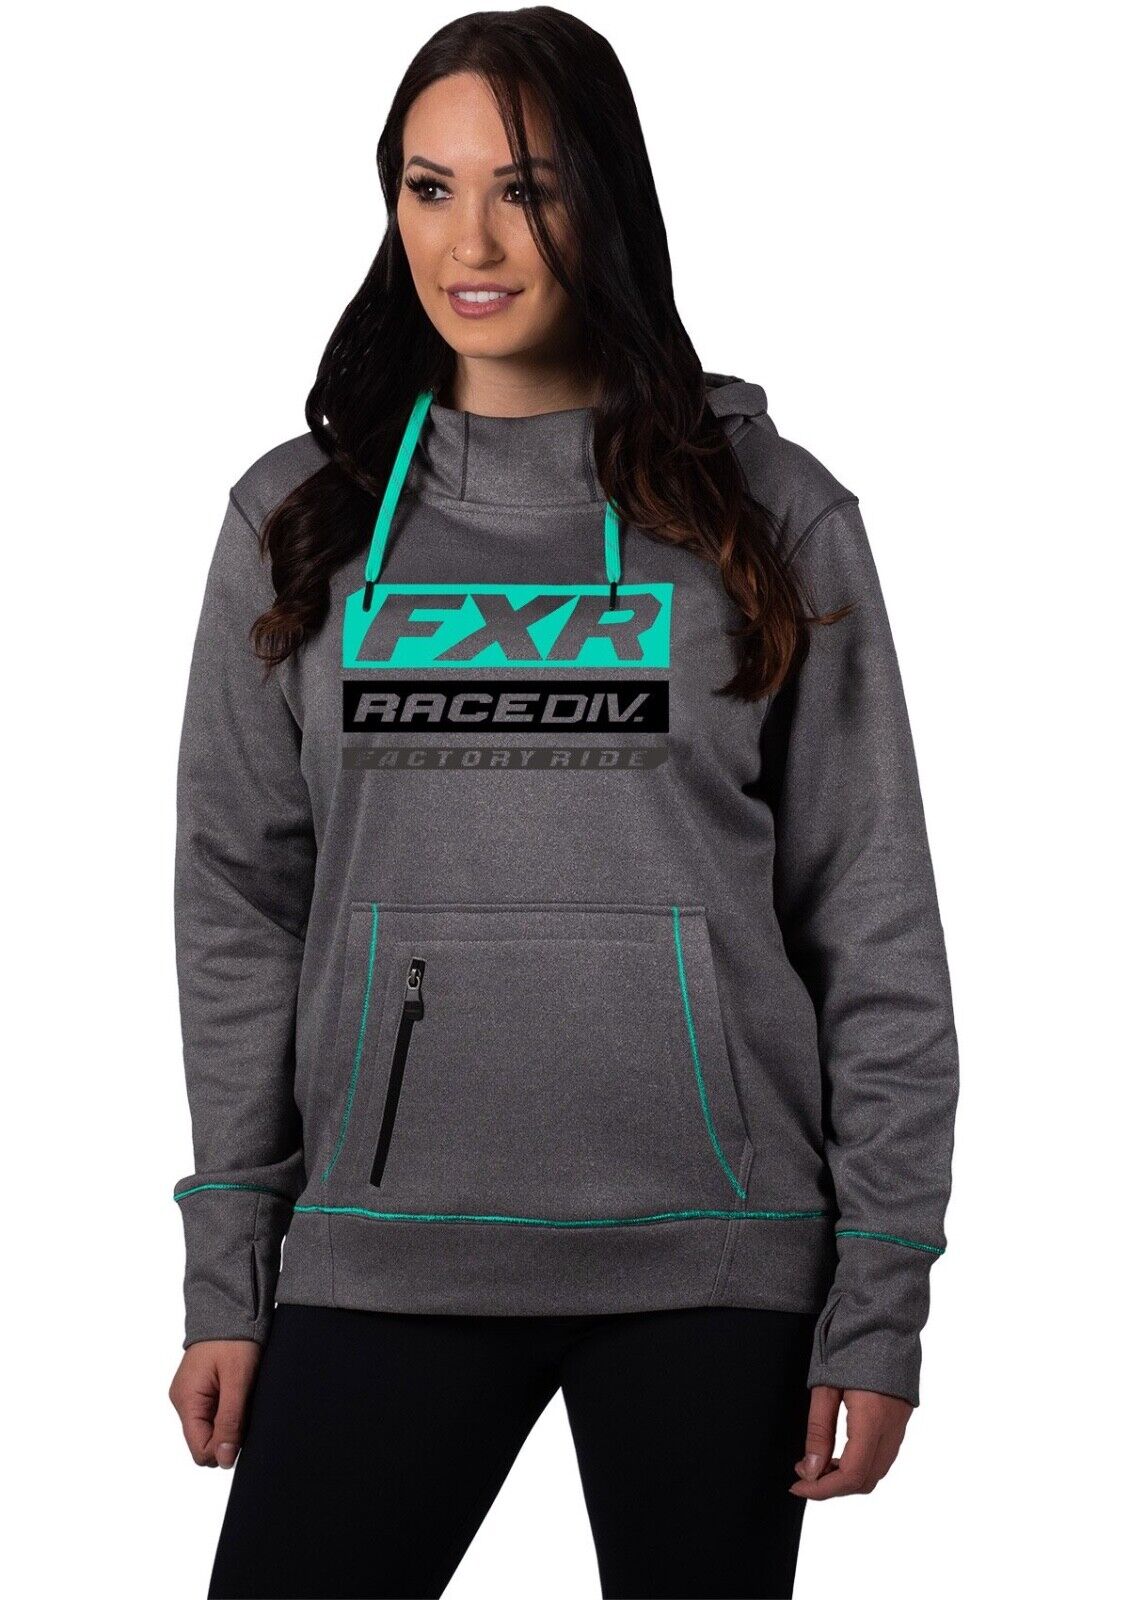 Official FXR Racing Womans Race Division Tech Pull Over Hoodie - 201213-0752